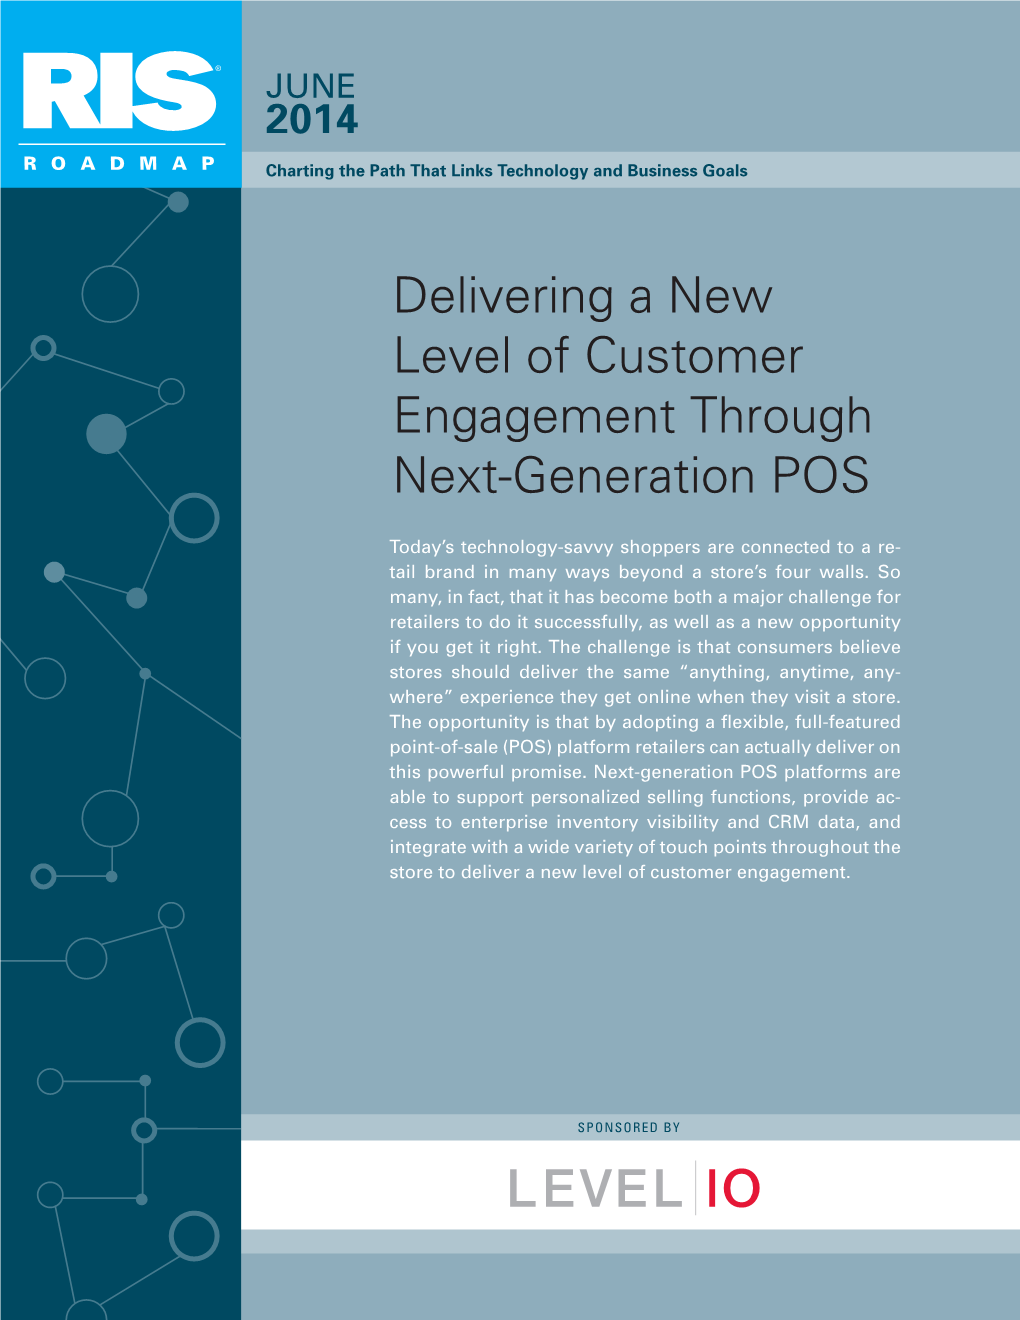 Delivering a New Level of Customer Engagement Through Next-Generation POS